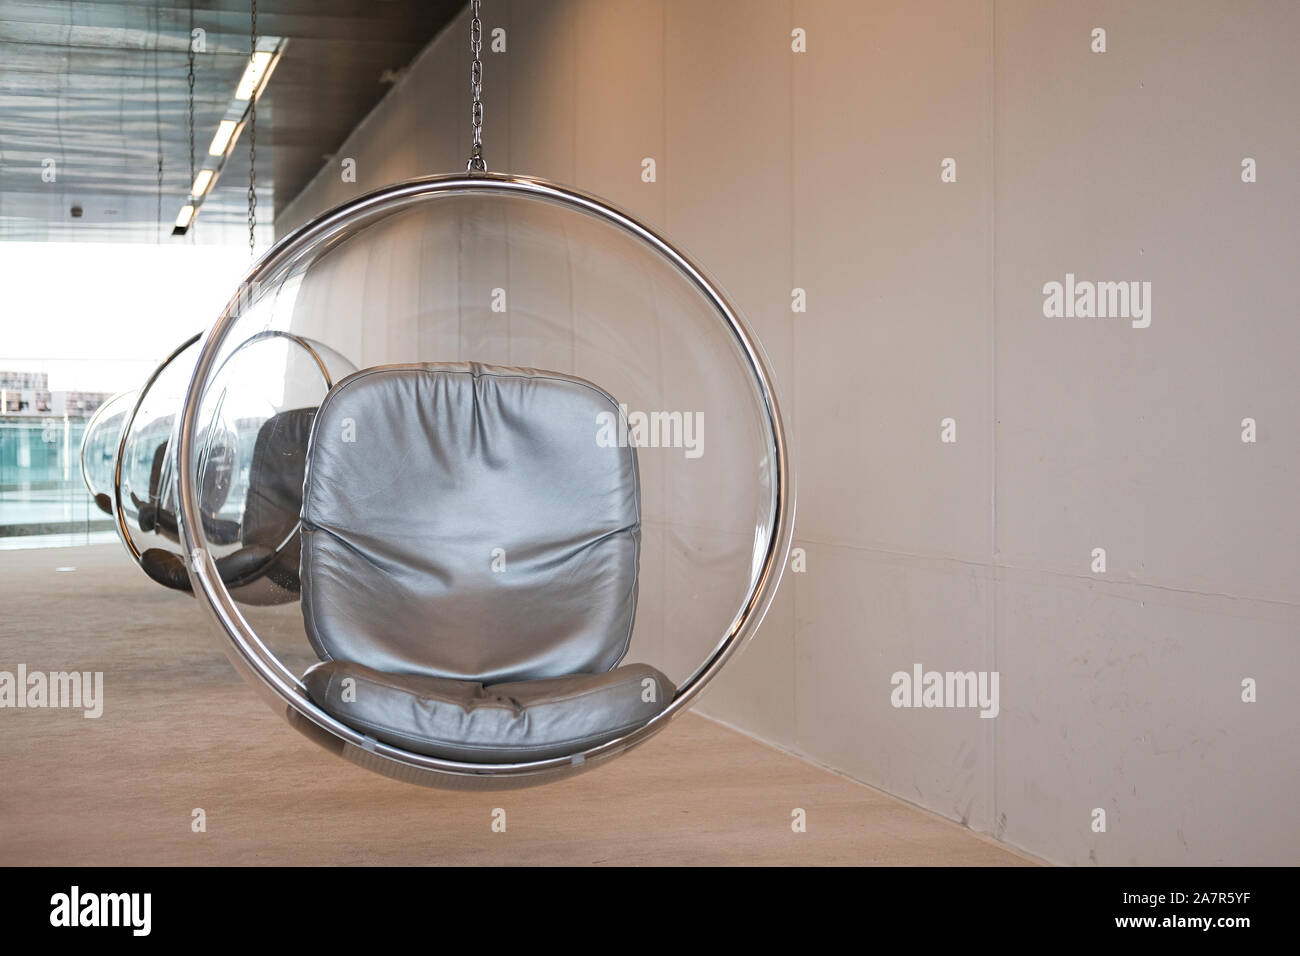 The suspended Eero Aarnio bubble chairs at the National Library in Education in Qatar provide a quiet reading space. Stock Photo